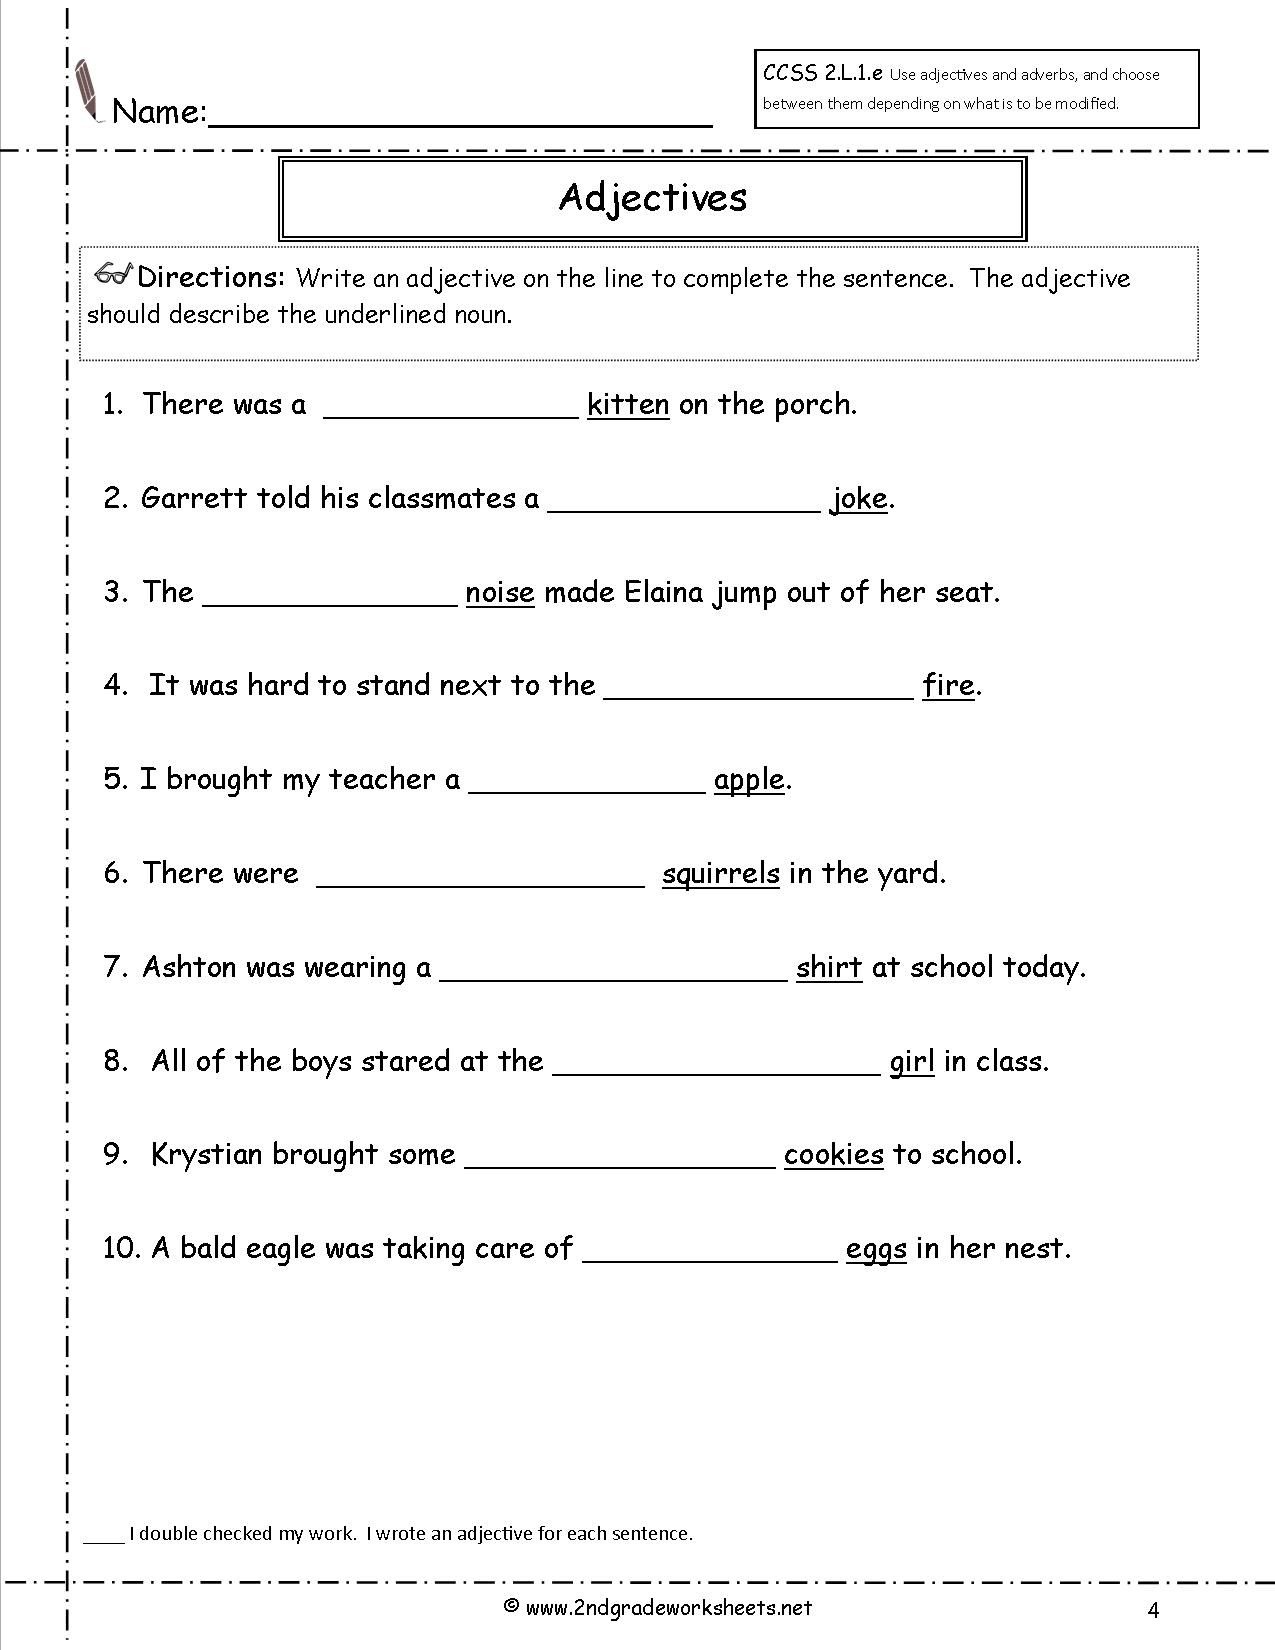 And Fill-In-The-Blanks Type Of Test For Grade 3 Students In English - Free Printable Third Grade Grammar Worksheets